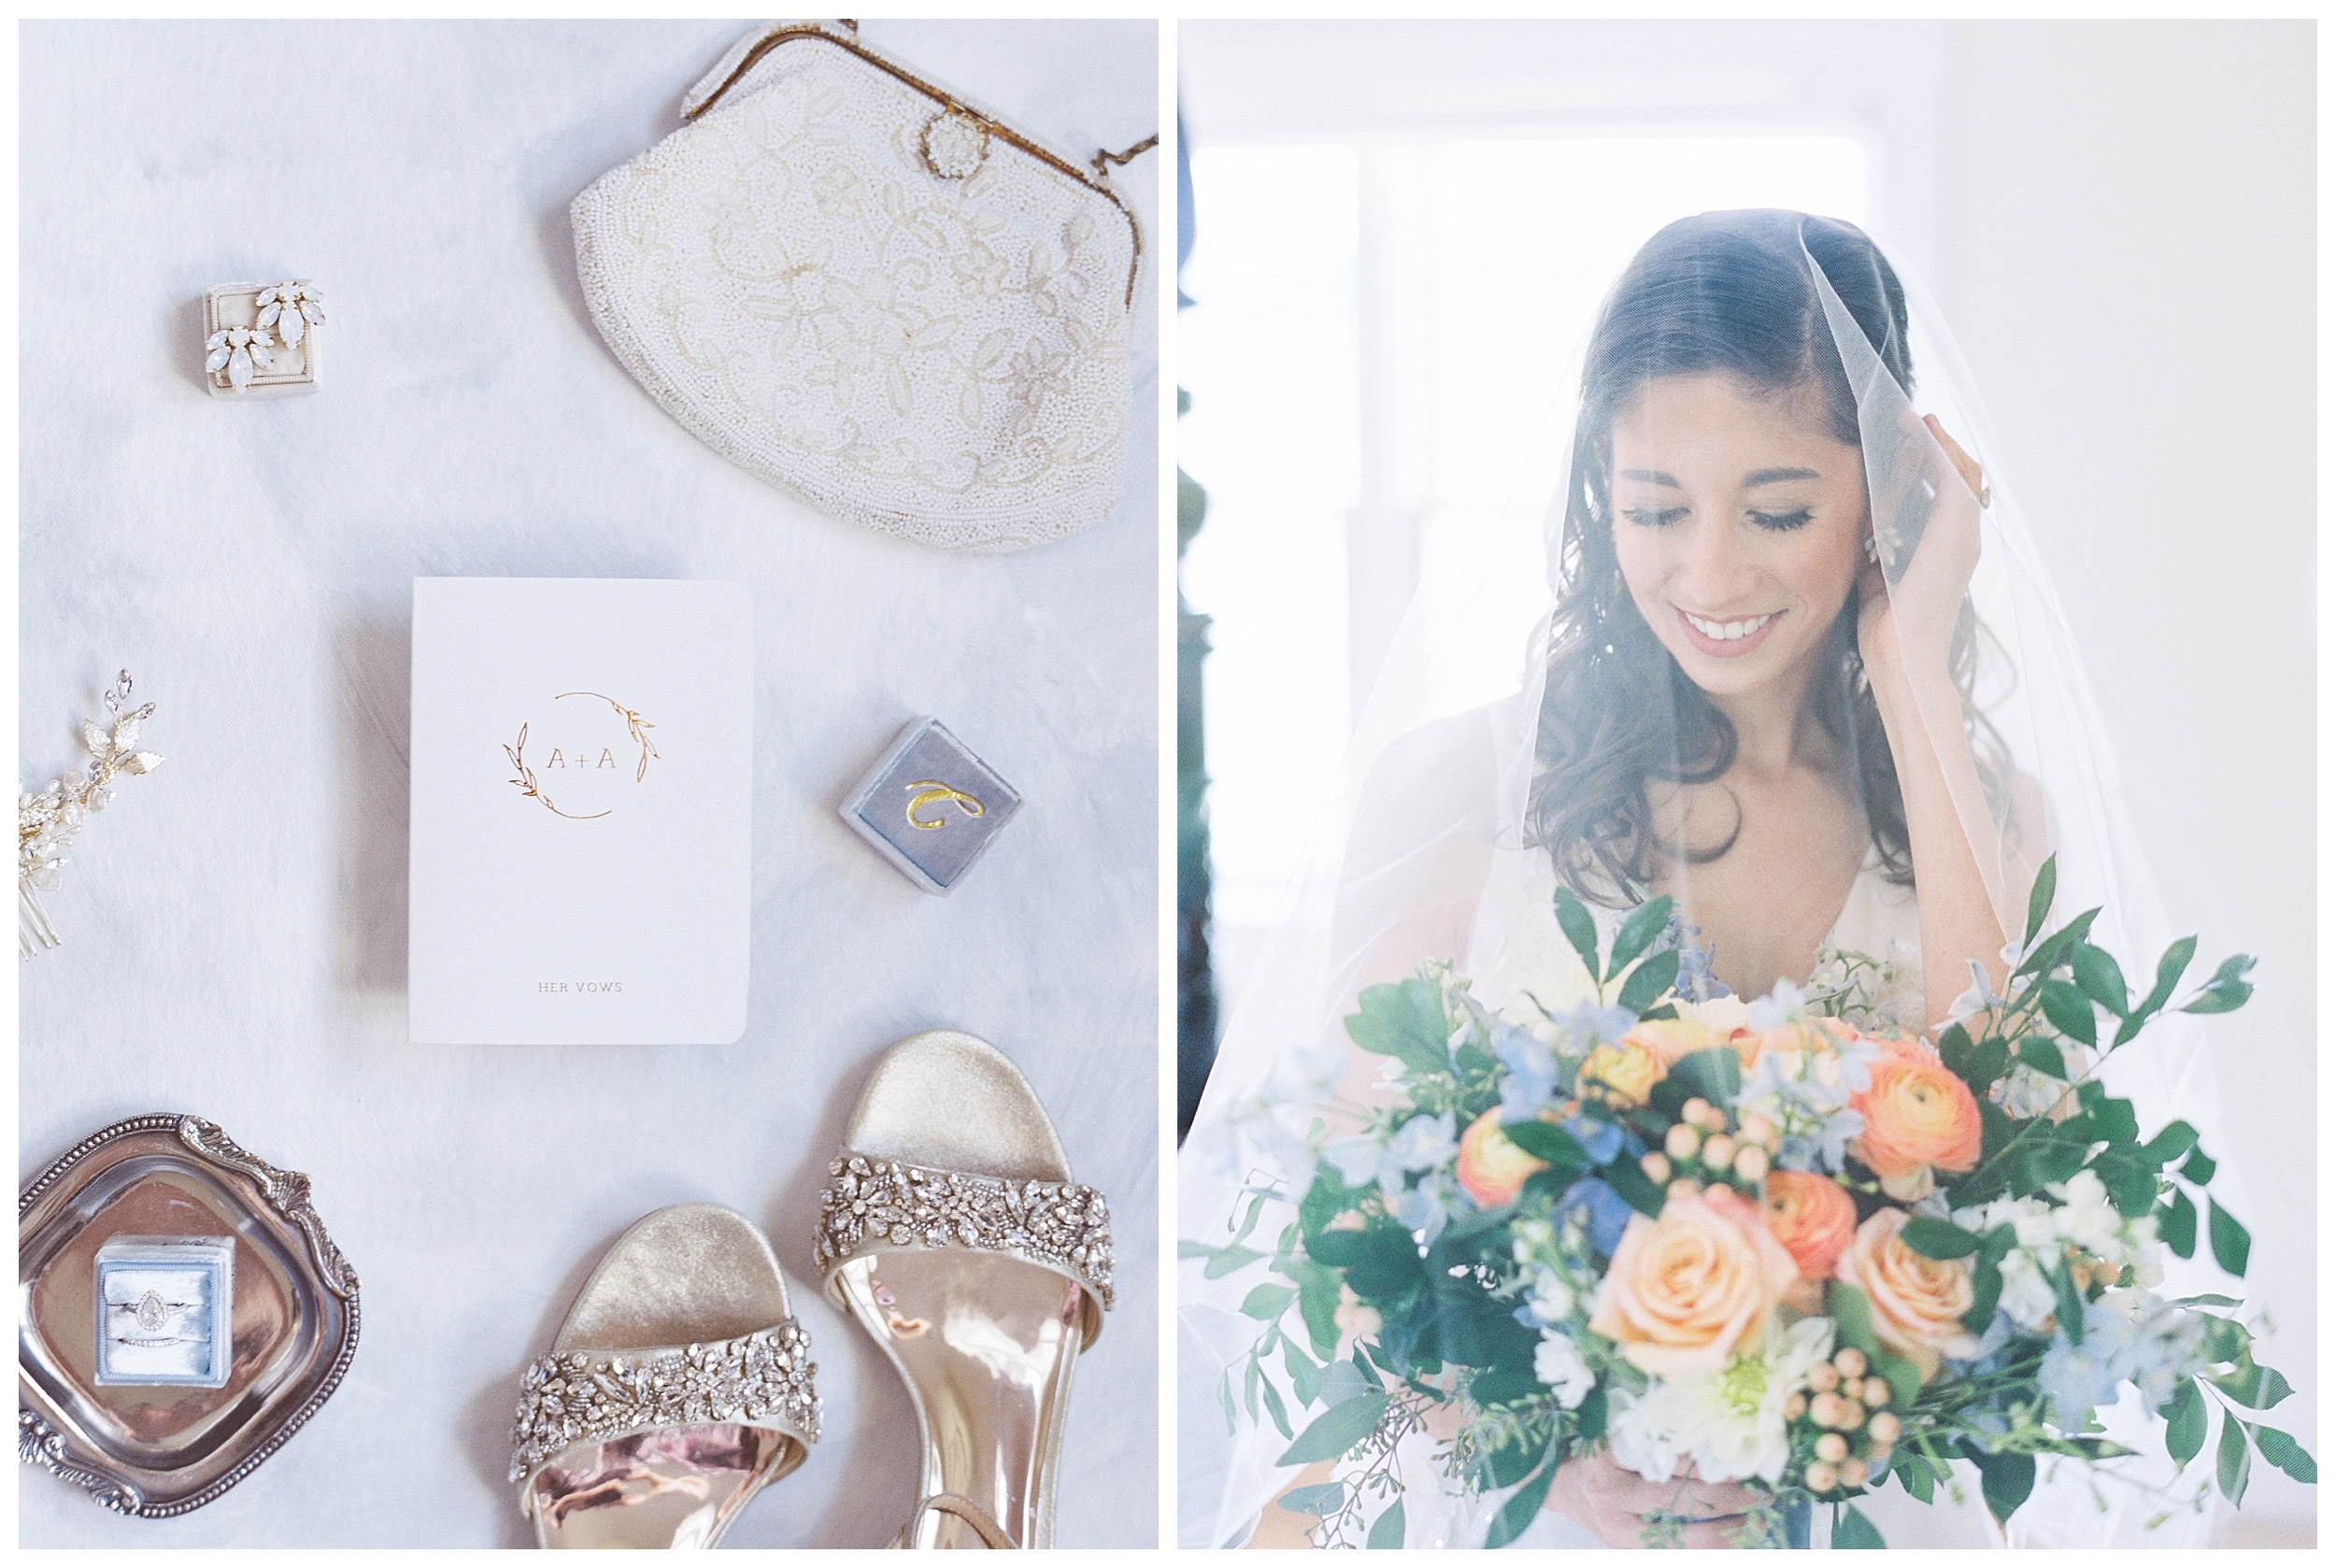 How to Choose a Wedding Send-Off — Northern Virginia Wedding Photographer  Beauty of the Soul Studio